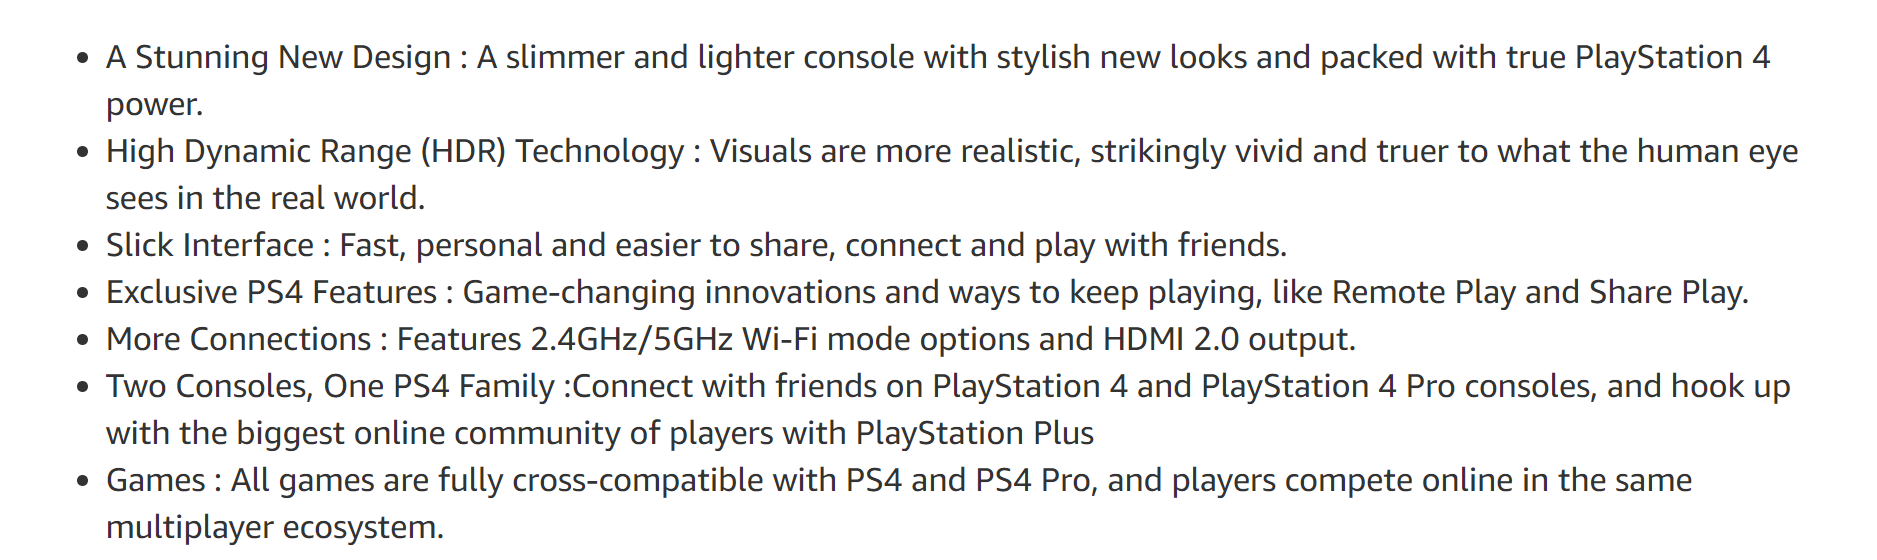 PS4 good product features